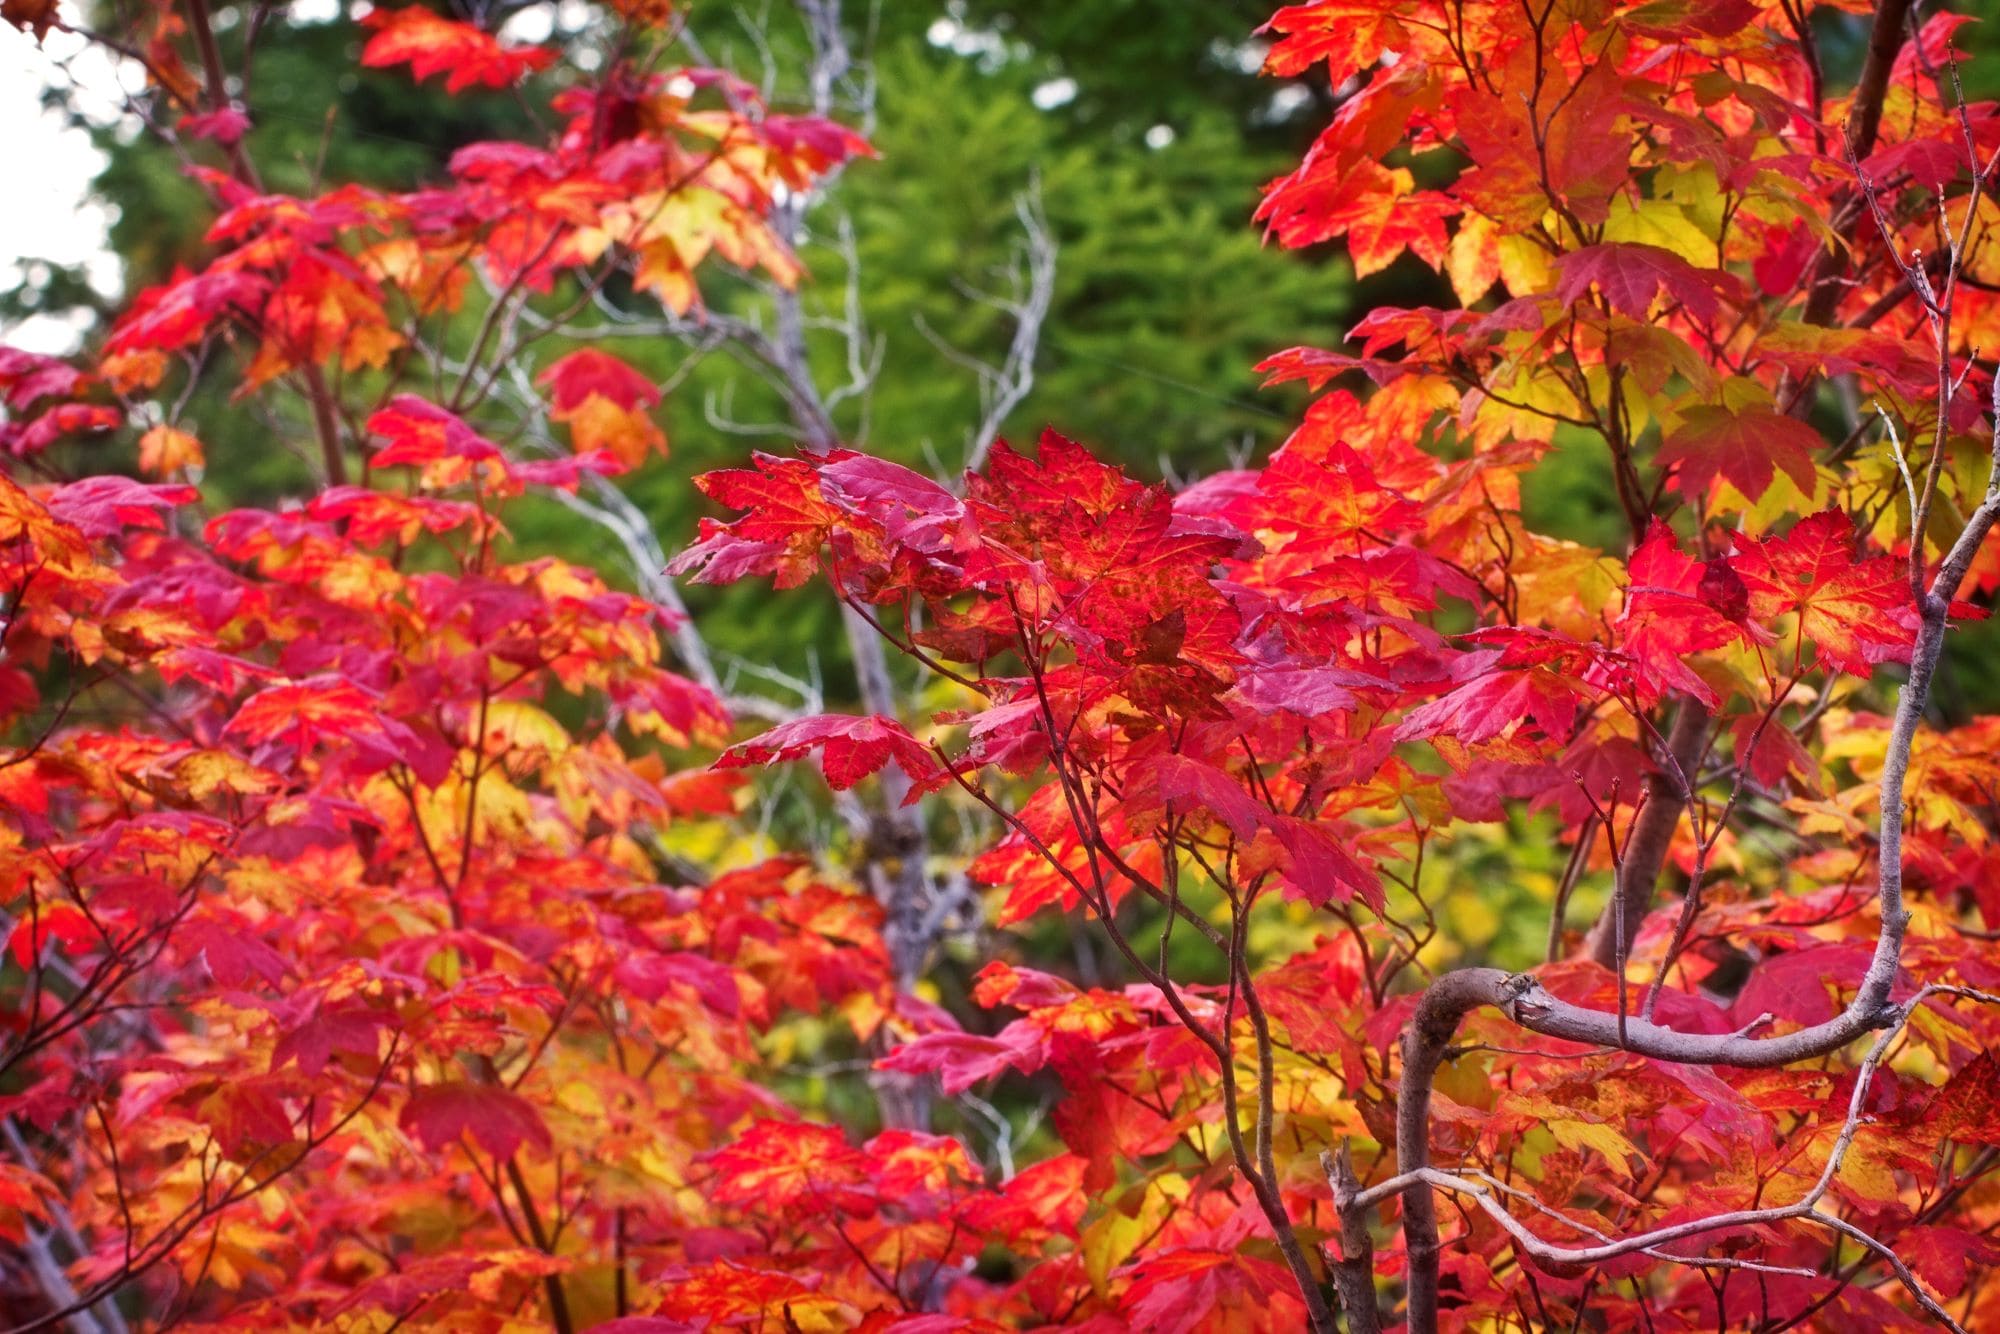 Additional Photos/autumn-colorful-leaves-background-SBI-300346362.jpg